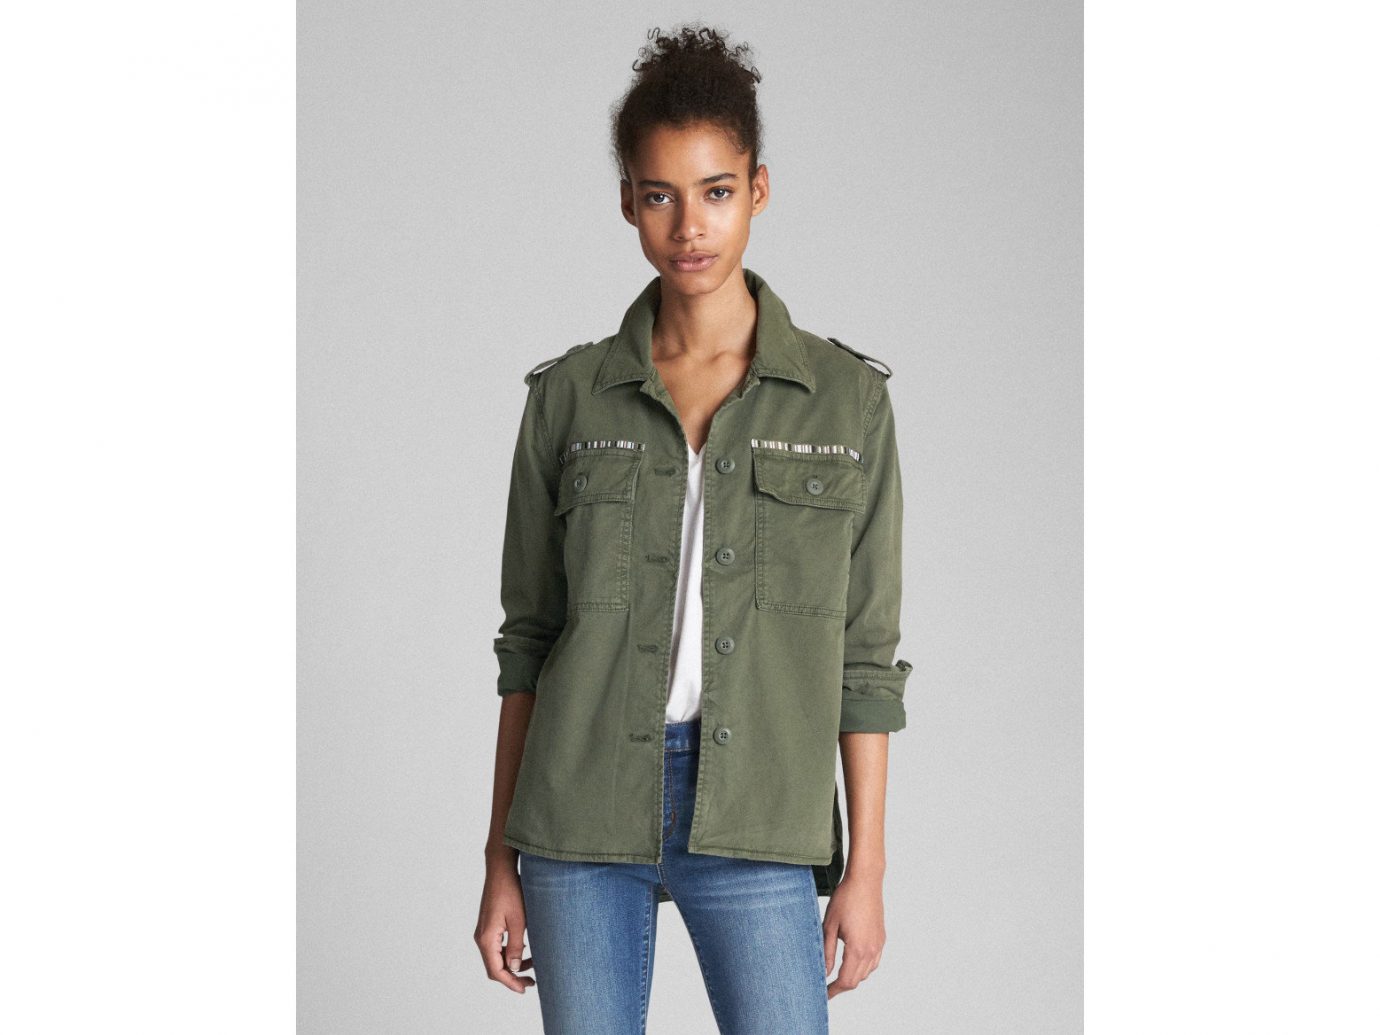 The Best Women's Spring Jackets